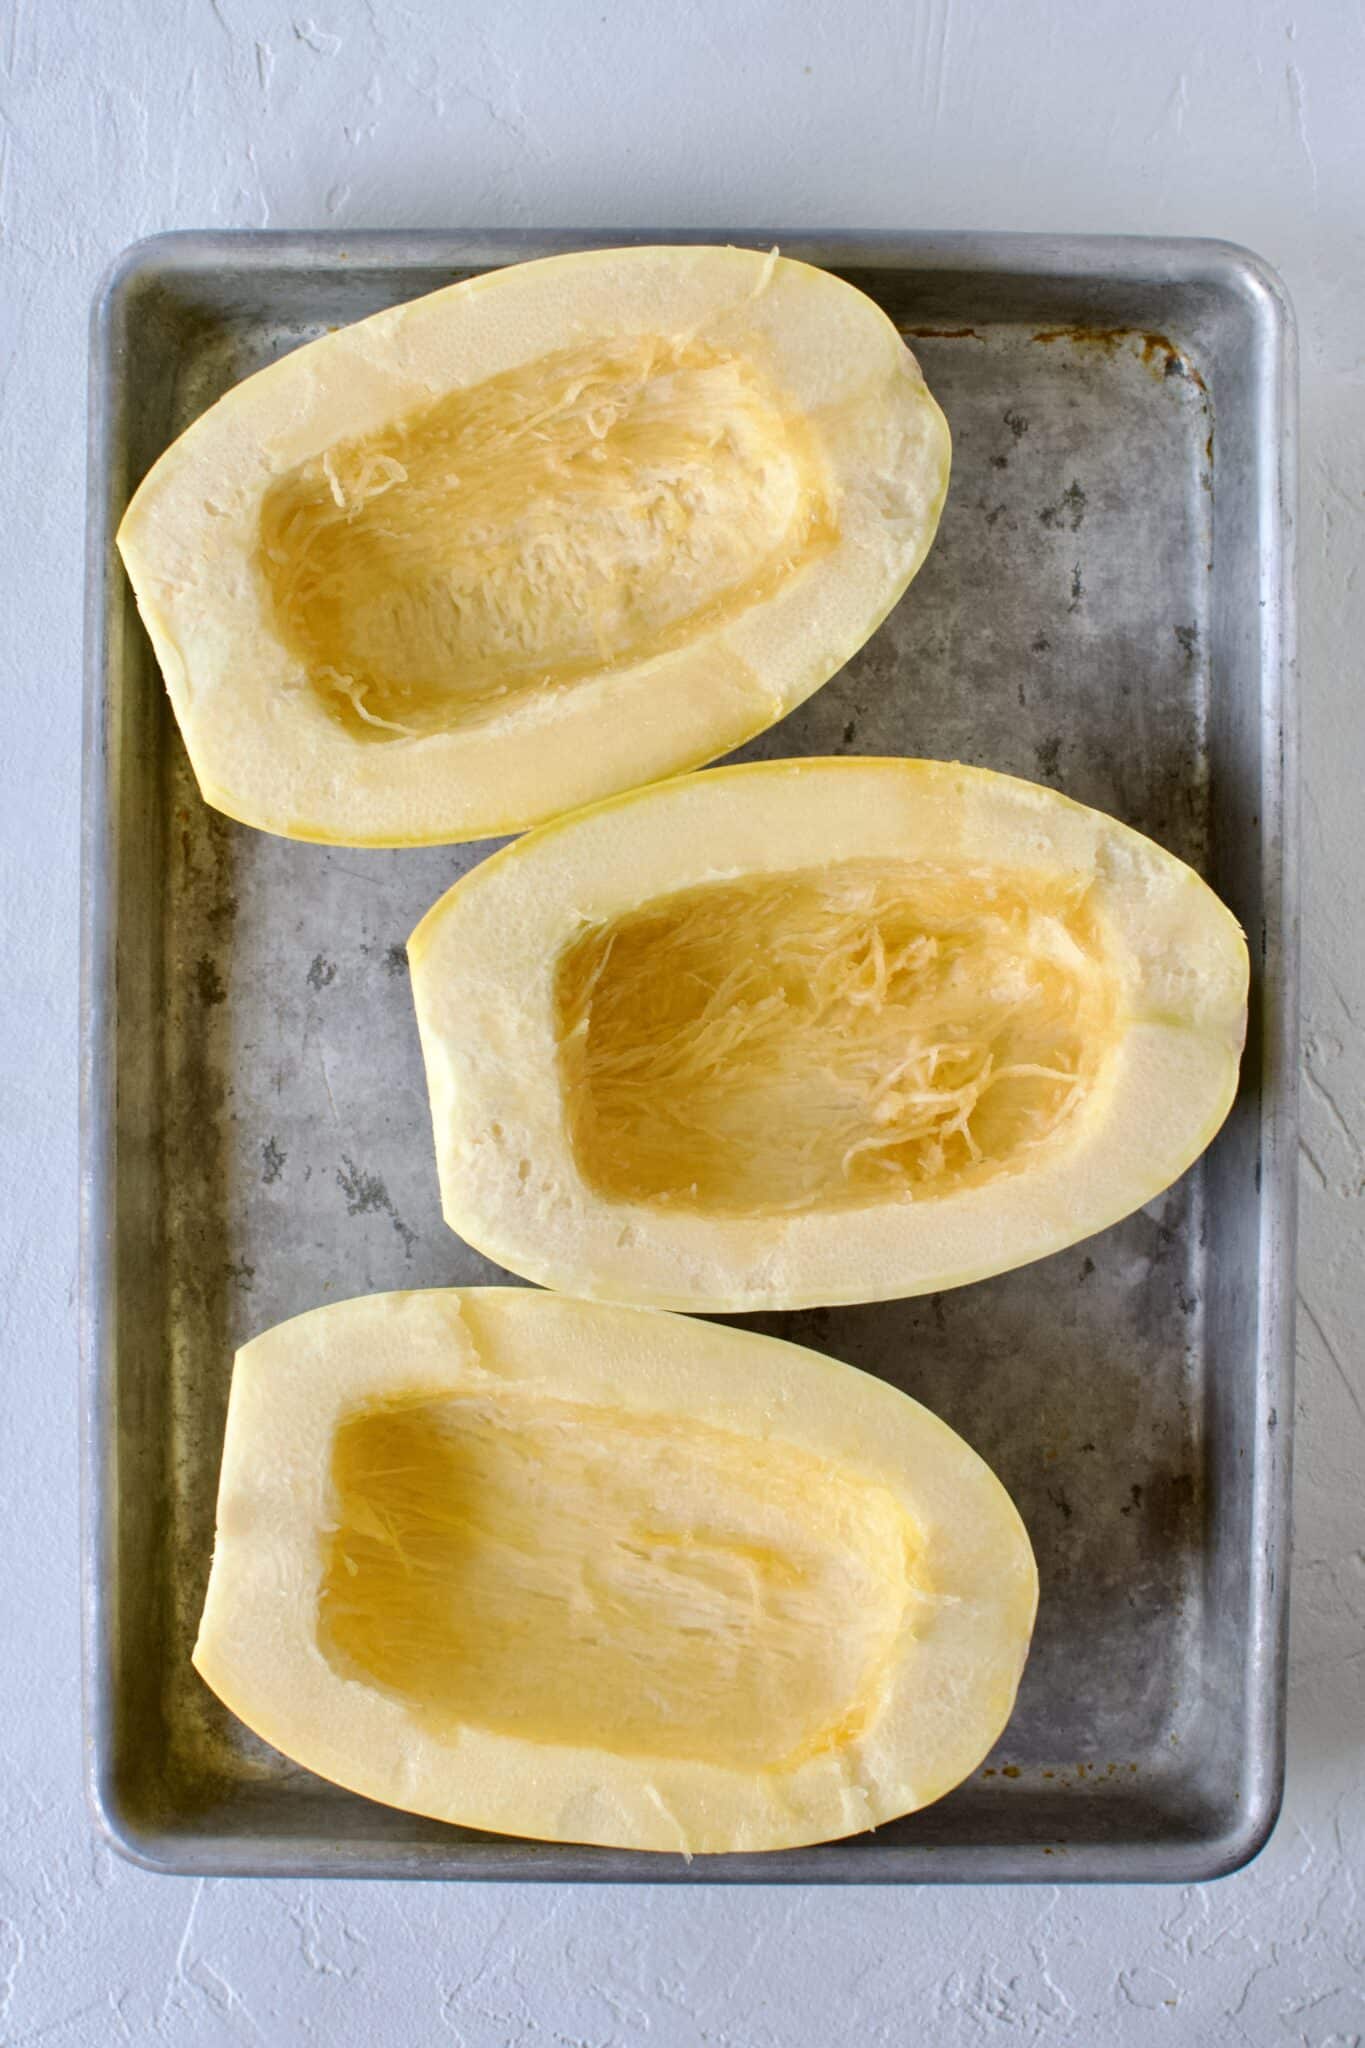 Spaghetti Squash, seeds removed, placed on a sheet pan.